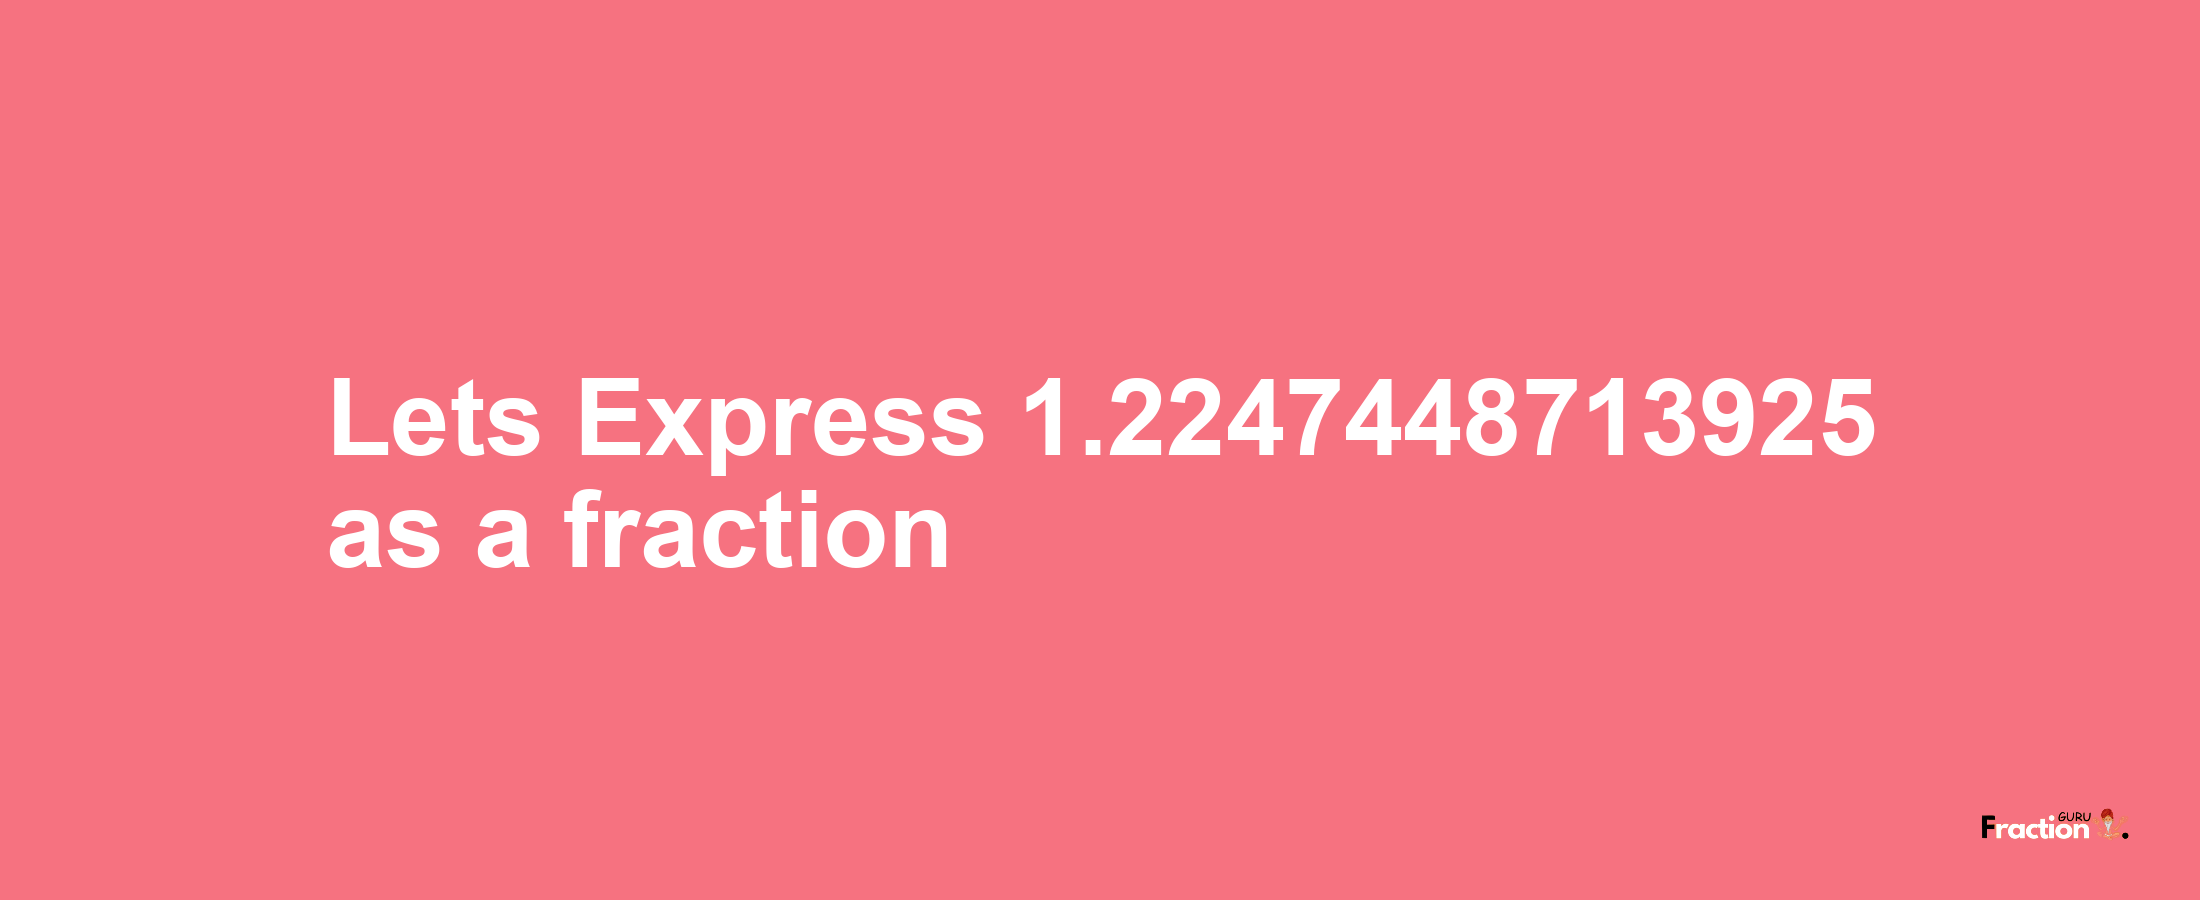 Lets Express 1.2247448713925 as afraction